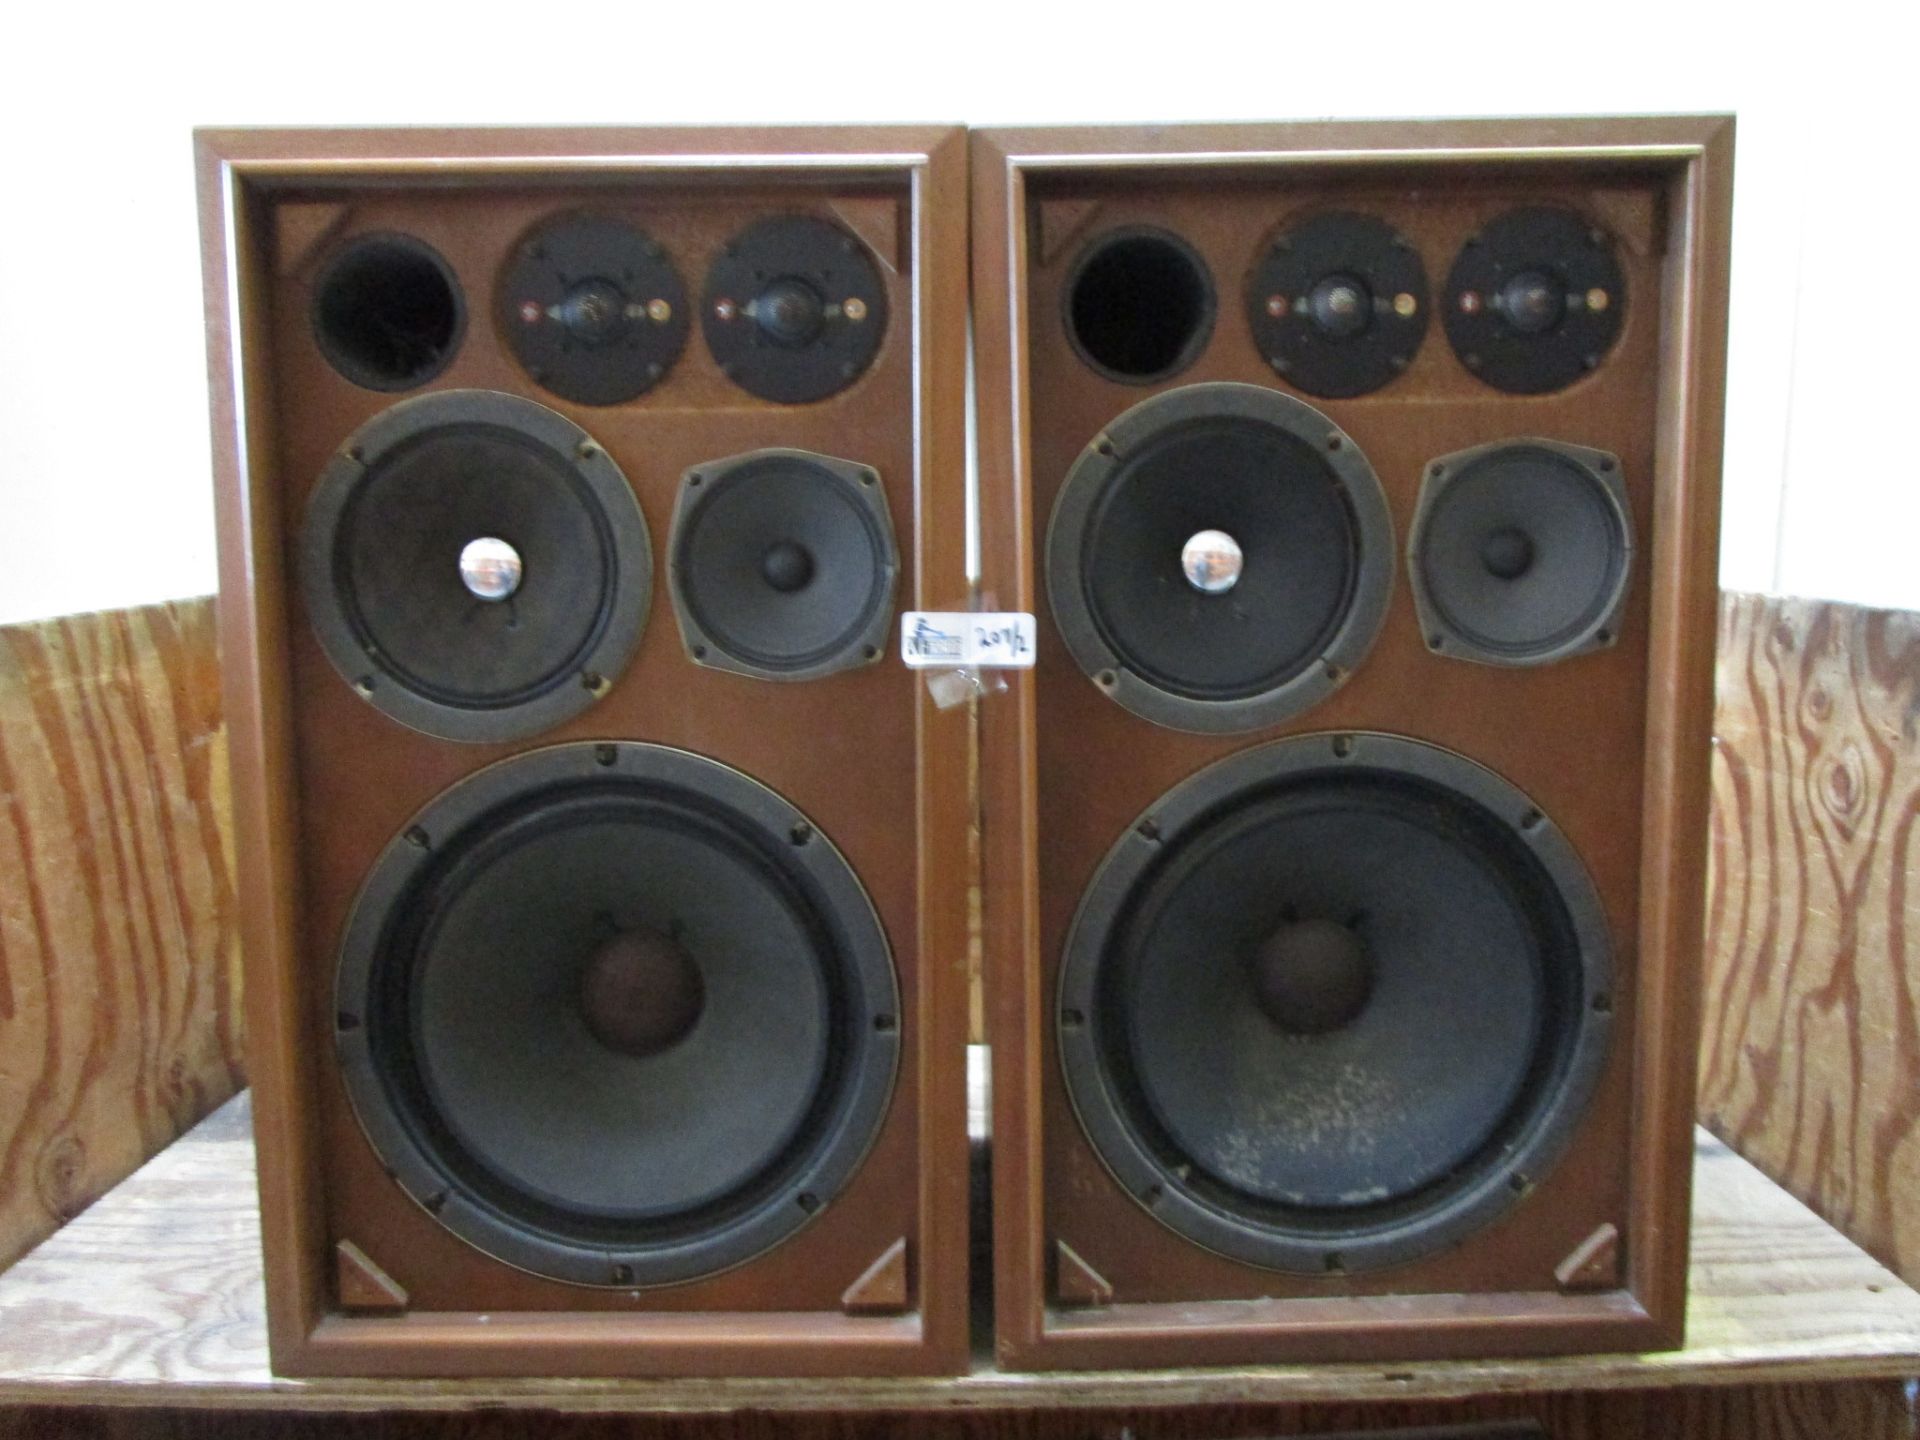 LOT OF 2 SANSUI SP-1500 3 WAY SPEAKERS - Image 2 of 4